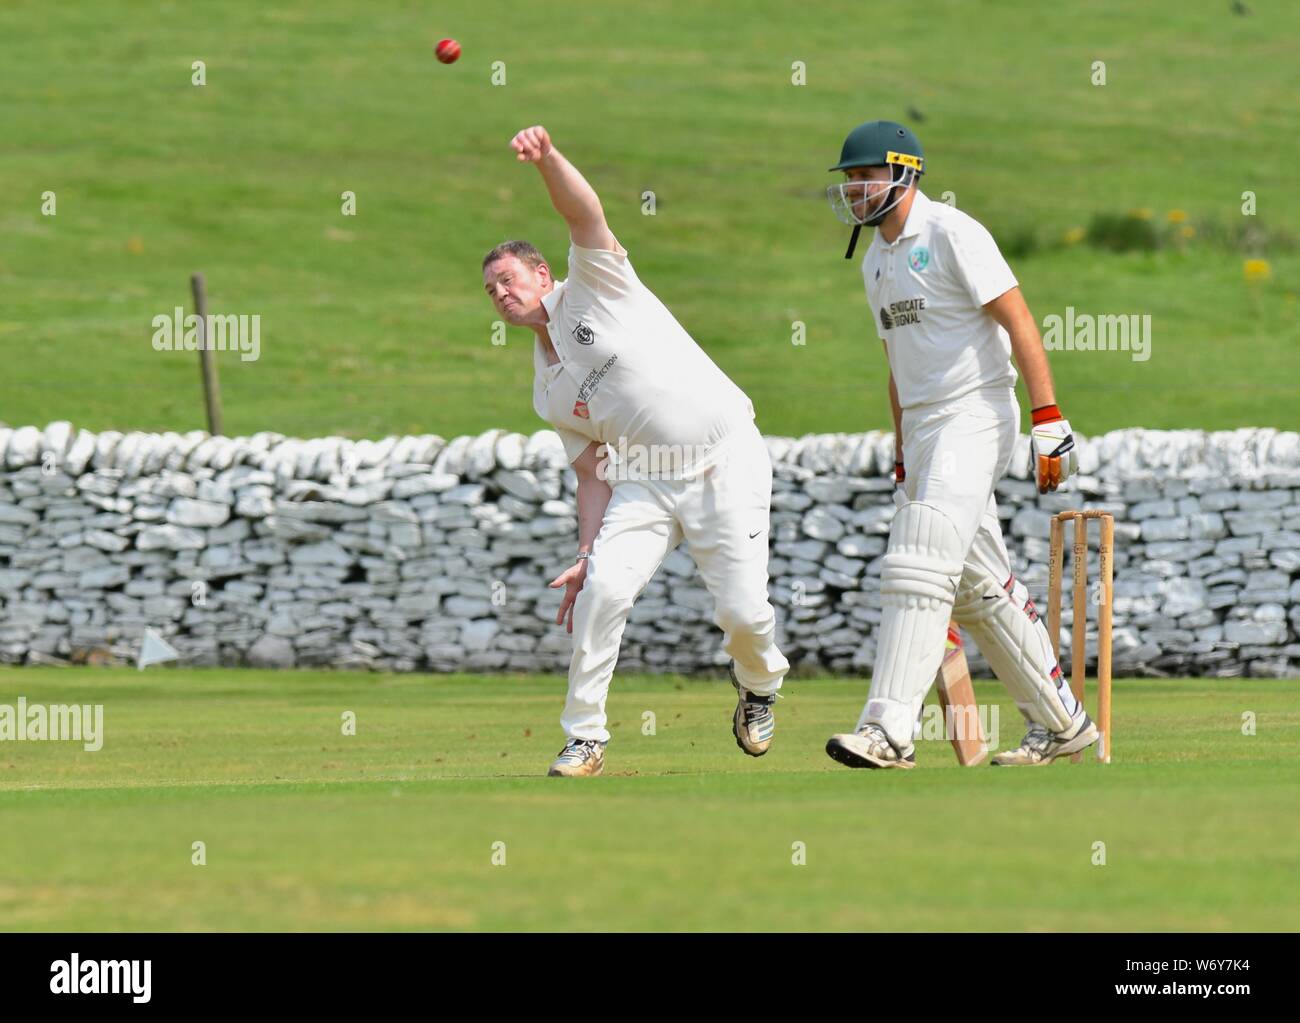 A fast bowler in actionin the match between Old Glossop and Tintwistle Stock Photo